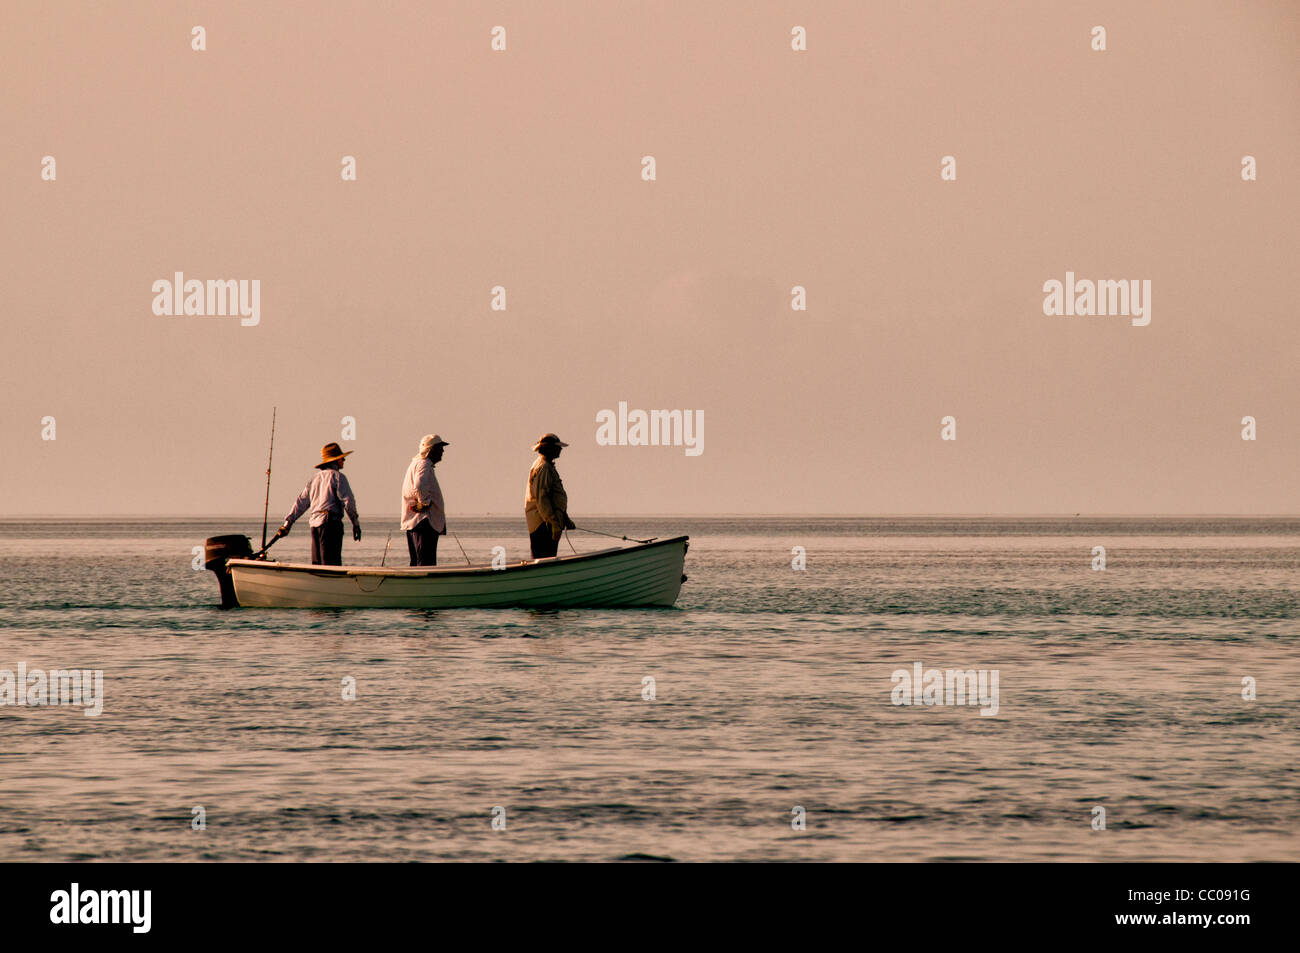 Three fishermen standing a small boat as they motor to a fishing spot on the edge of the reef at Swains Reef on the southern end of Australia's Great Barrier Reef. The later afternoon sun creates a warm, golden glow. Stock Photo